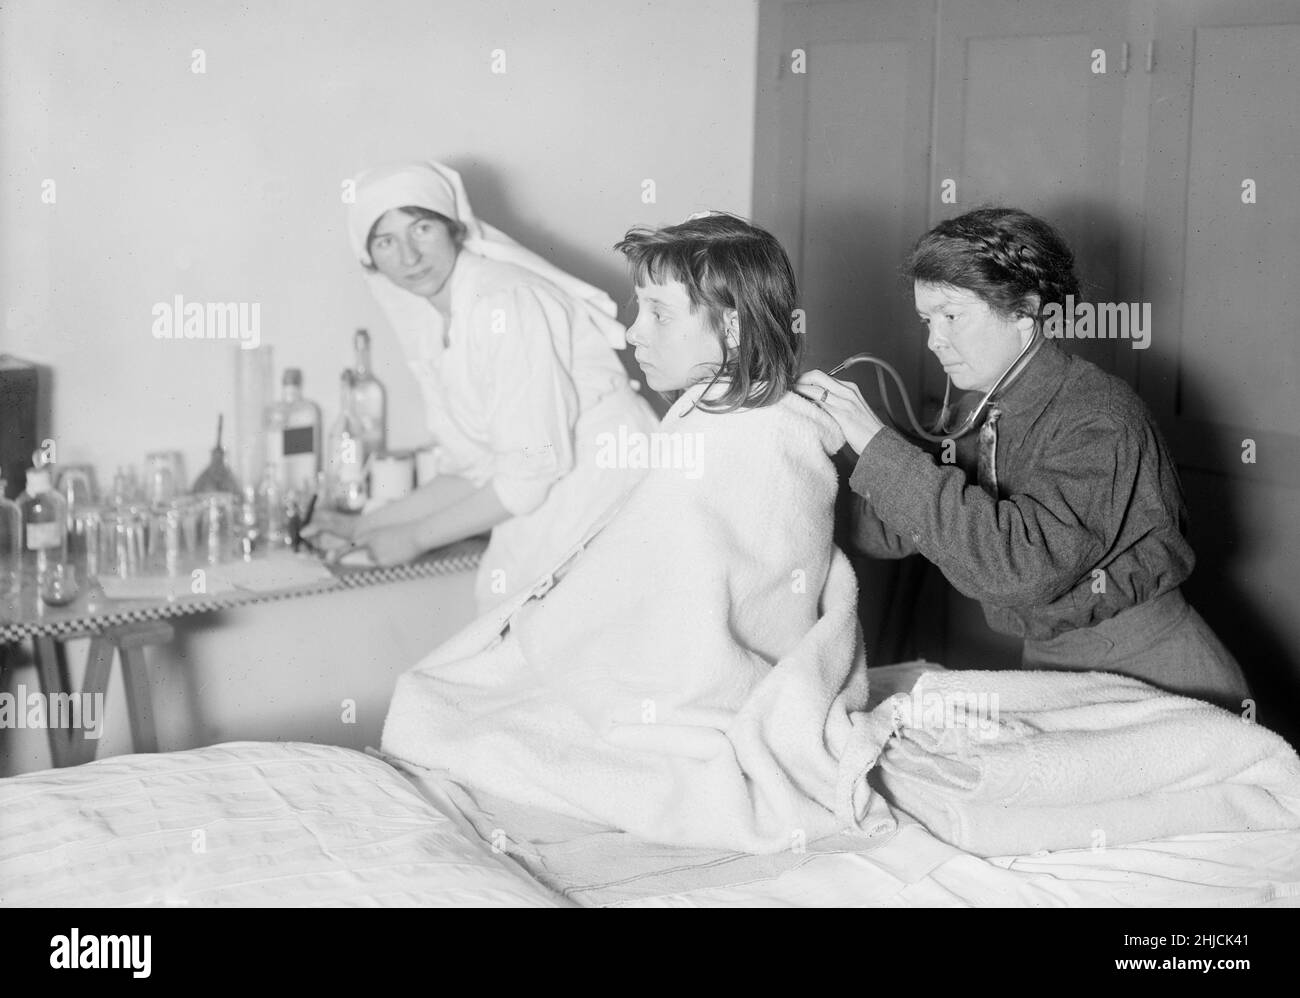 Examining an undernourished refugee child with tuberculosis in the dispensary at Rue Boissy d'Anglas, Paris. Stock Photo